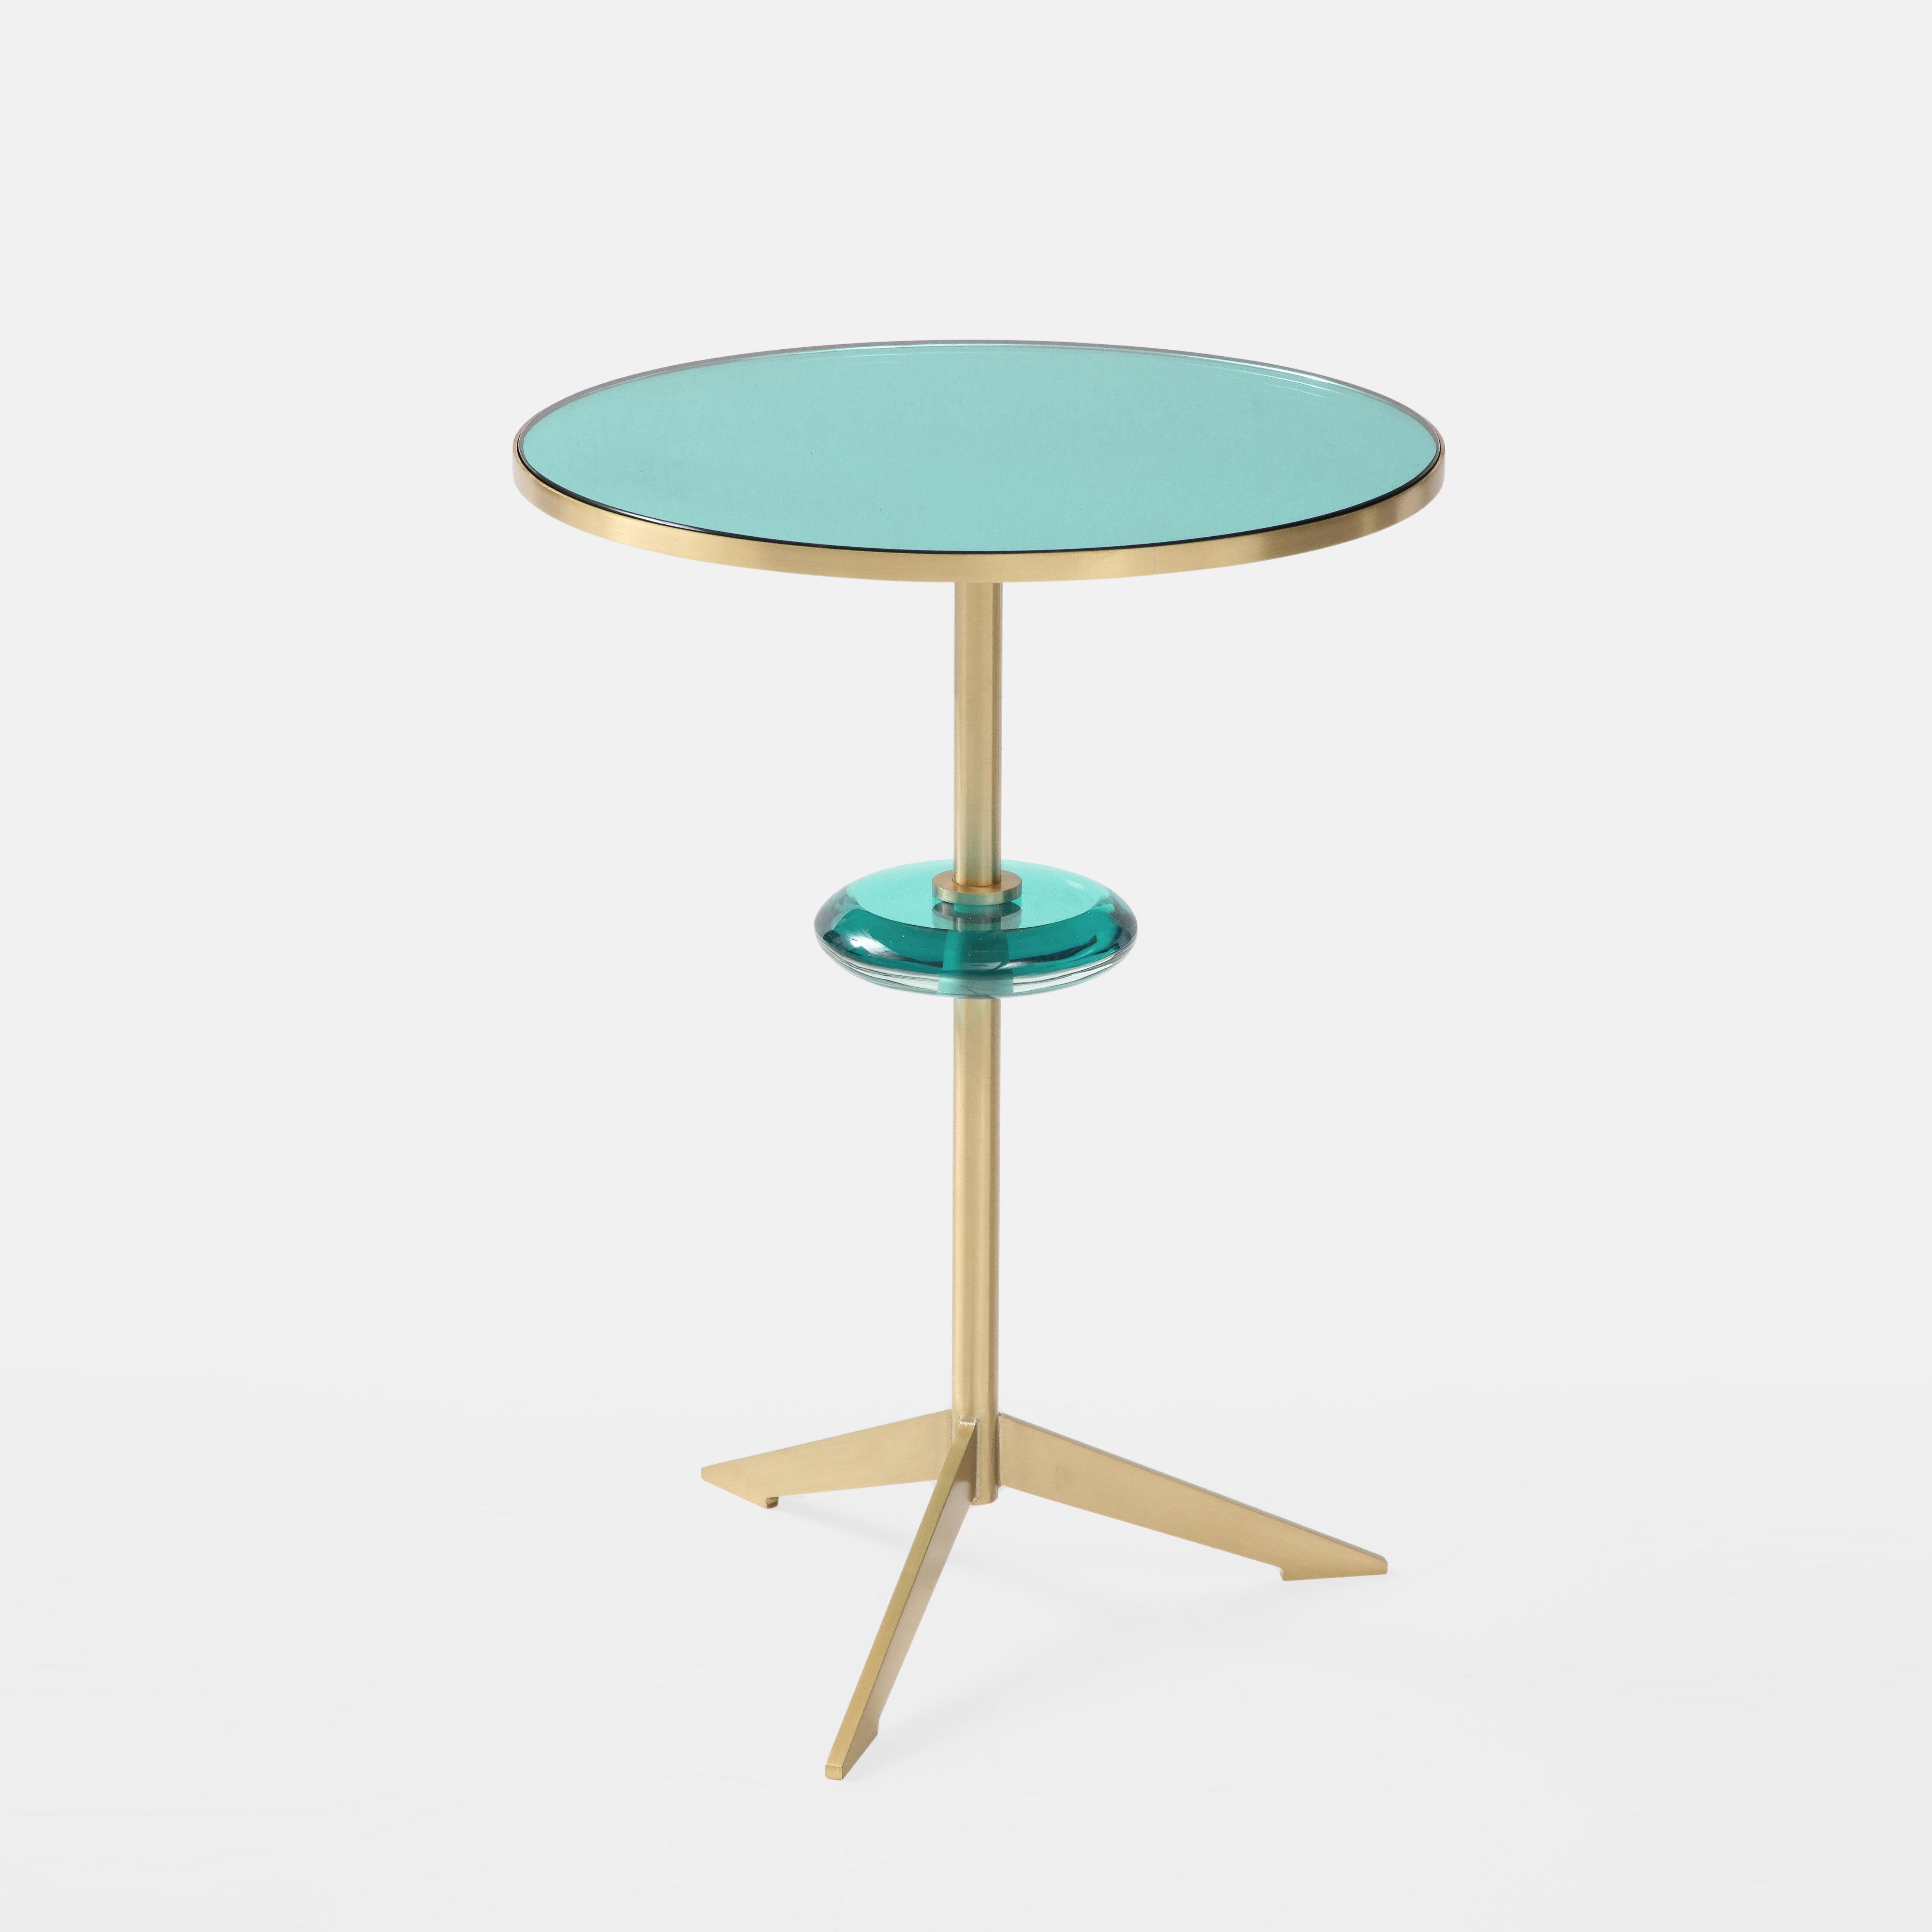 Effetto Vetro exquisite custom contemporary round side table with green glass mirrored top inset on satin brass tripod base with floating green glass orb suspended on brass stem. This exquisite modernist sculptural side table is handmade and the